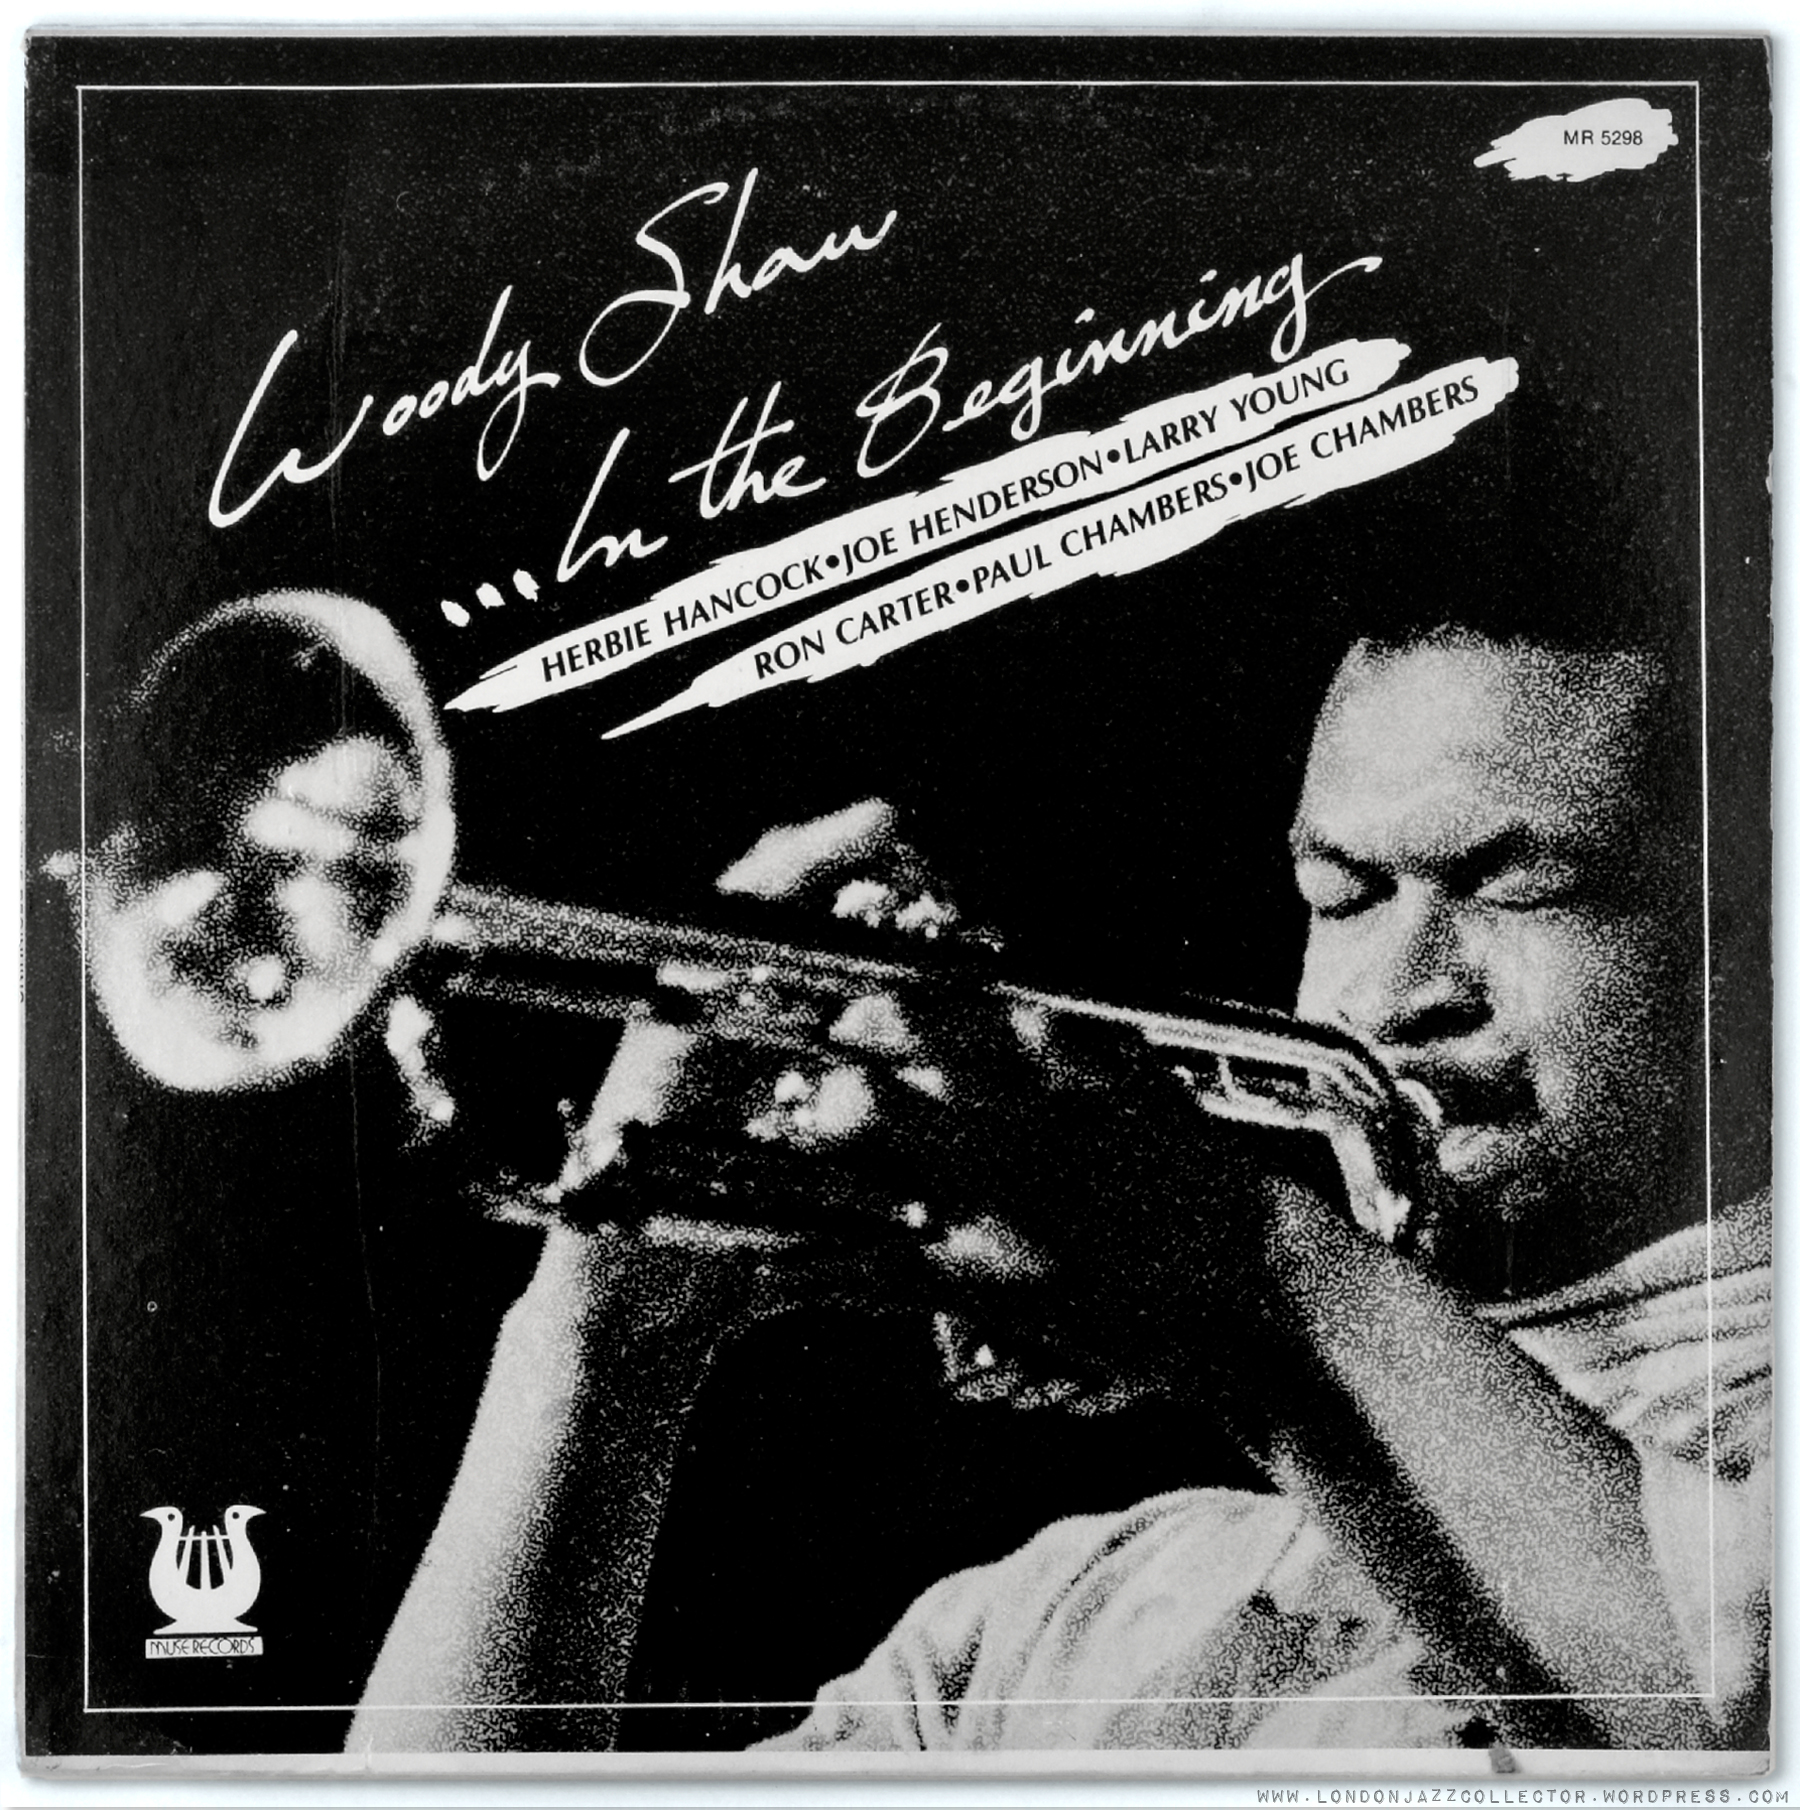 woody-shaw-in-the-begining-cover-1800-lj